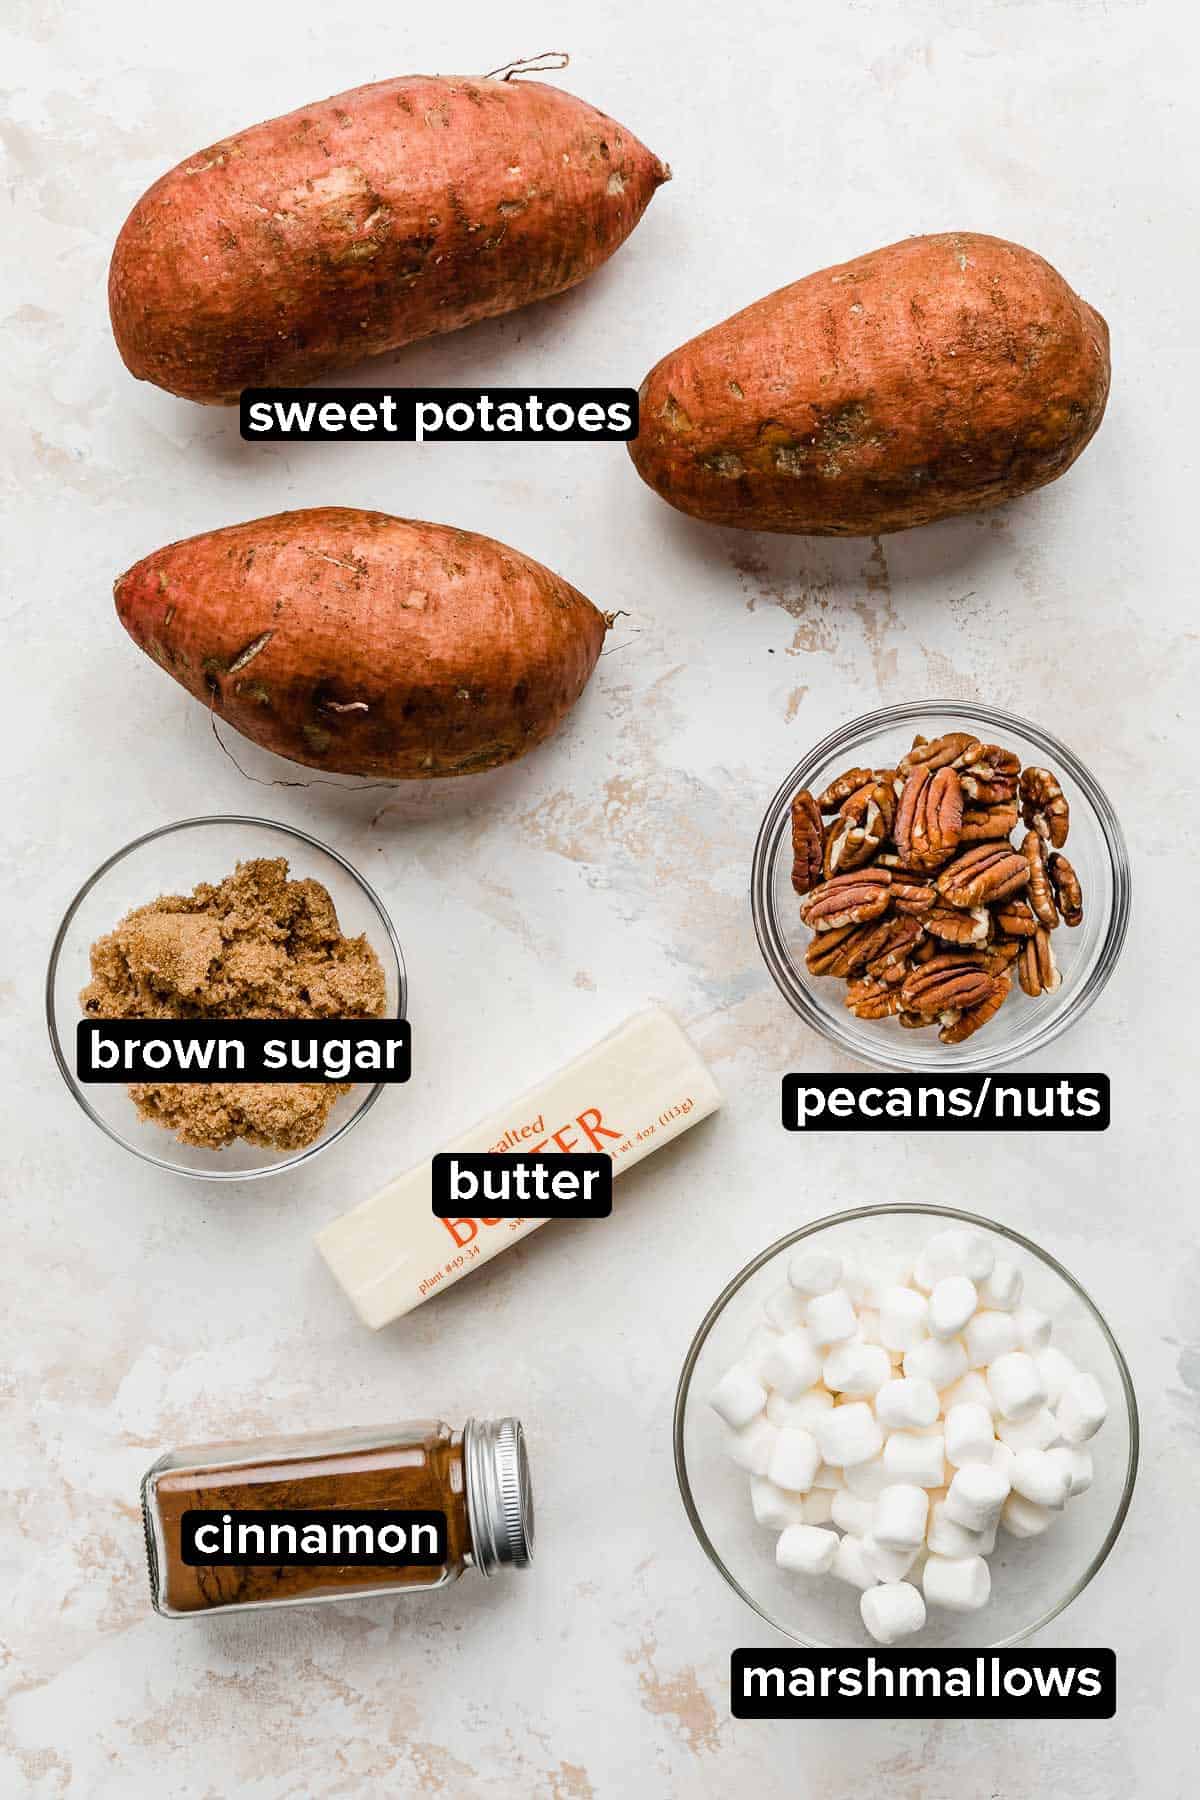 Baked Sweet Potato ingredients and sweet potato topping ideas on a white background: marshmallows, cinnamon, butter, nuts, brown sugar.